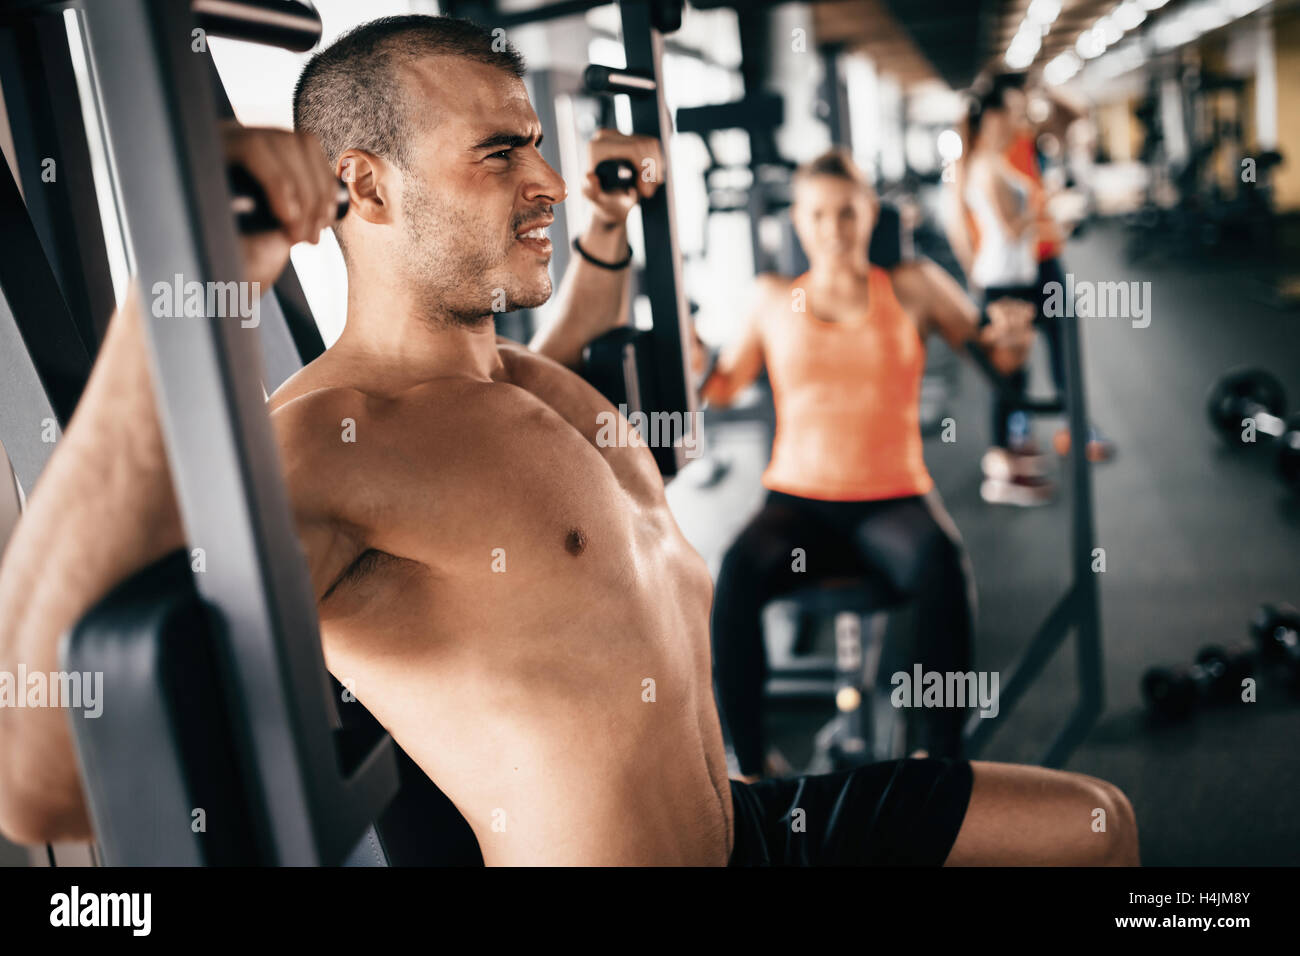 Determined athlete pushing the limits in gym Stock Photo